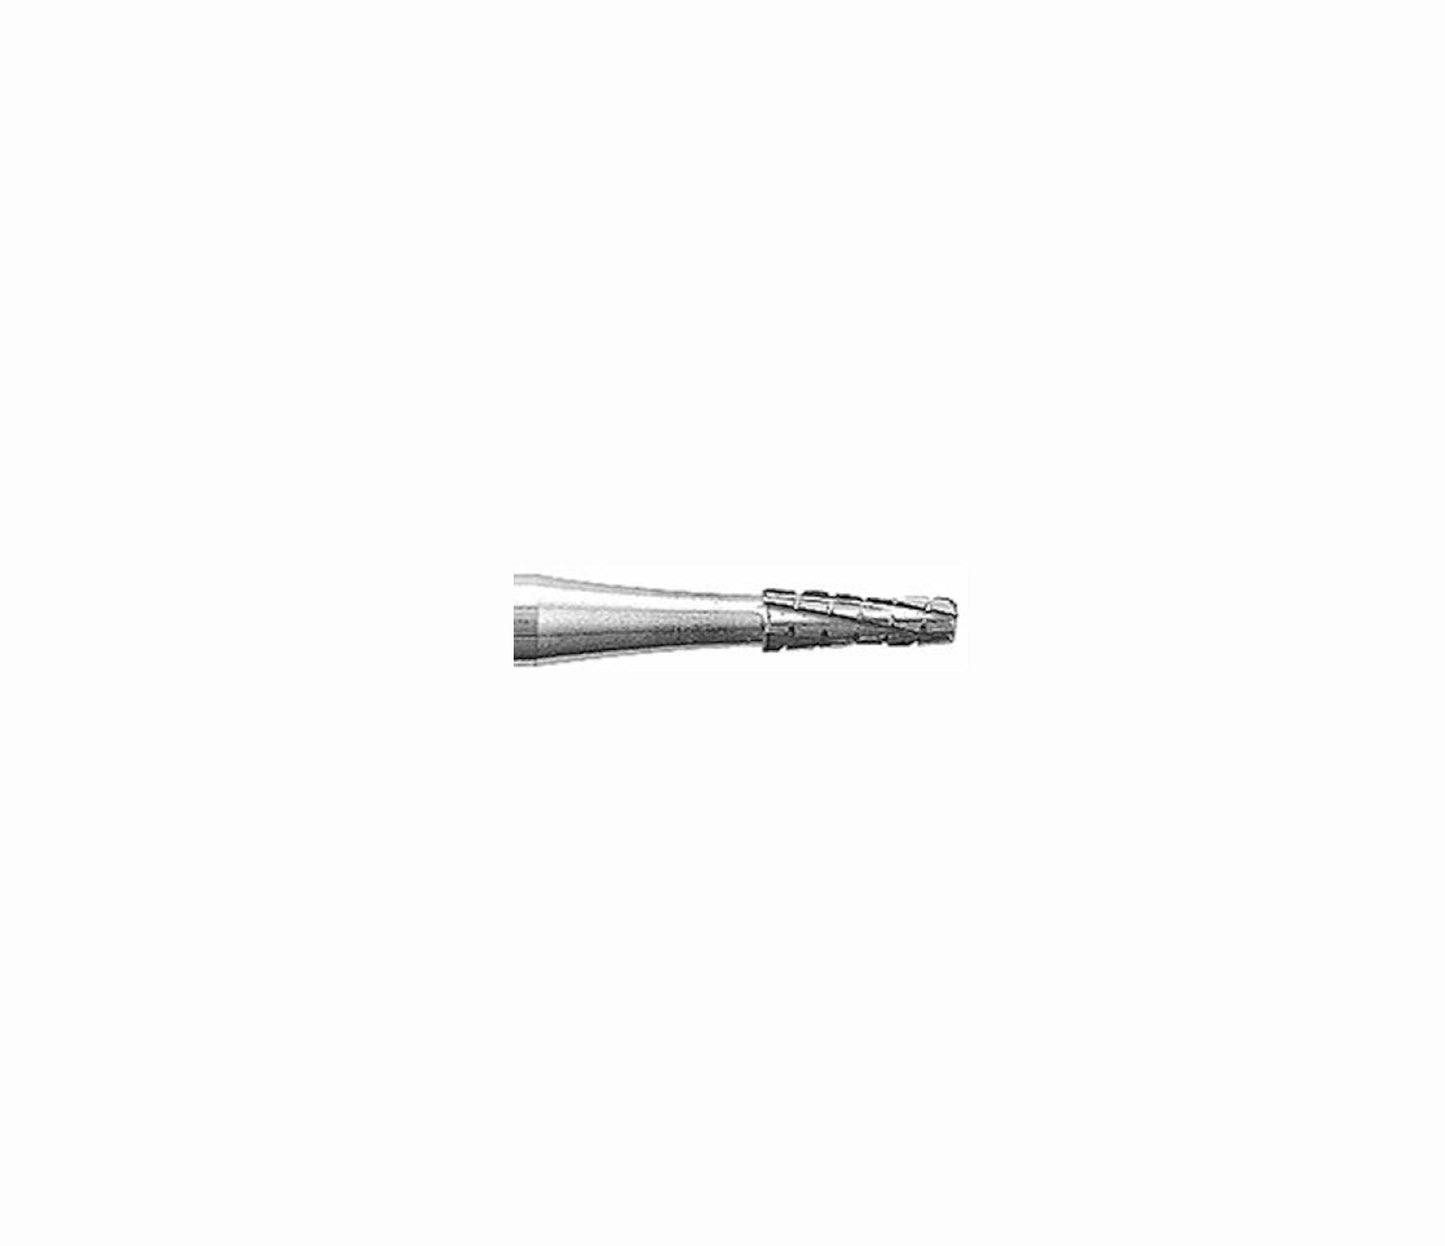 Komet #H33- Carbide Tapered Burr With End Cut- Pack of 1 (sizes available: 0.90mm-2.10mm)